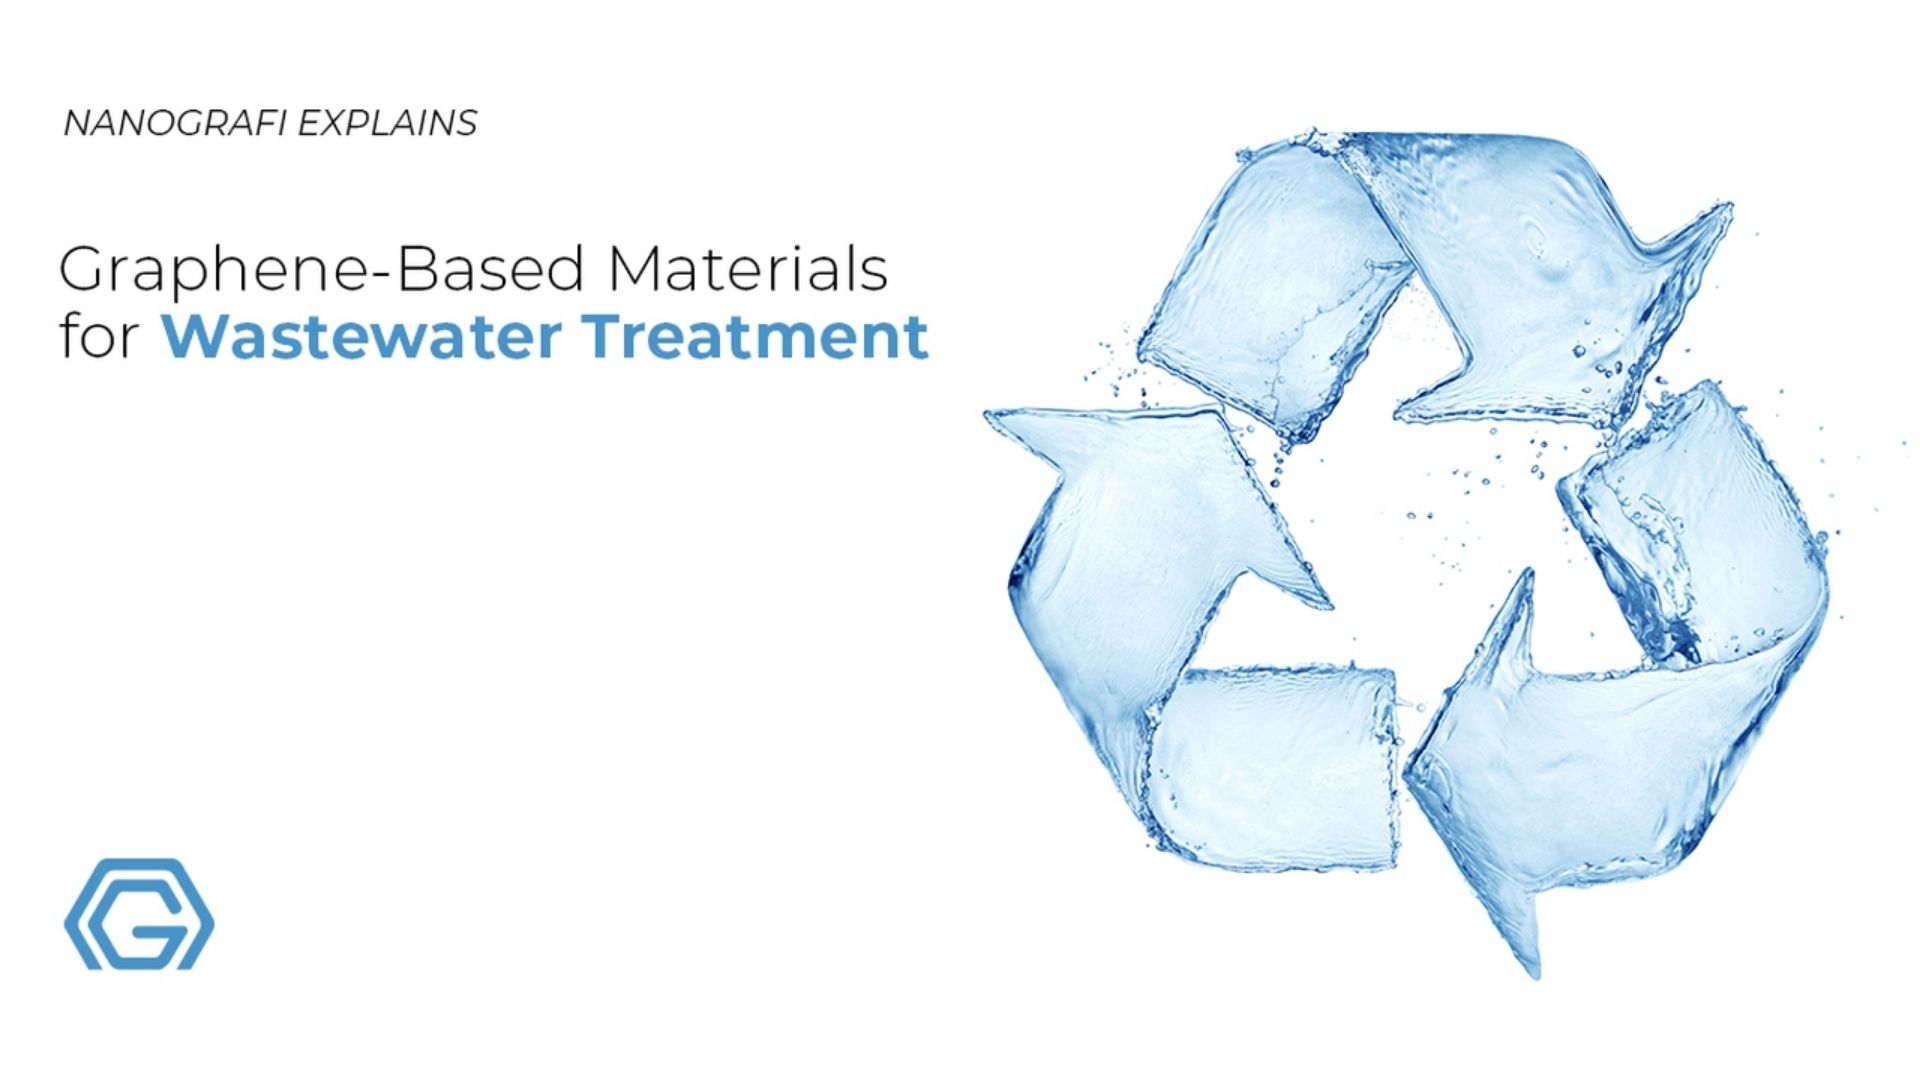 Graphene-based materials for wastewater treatment